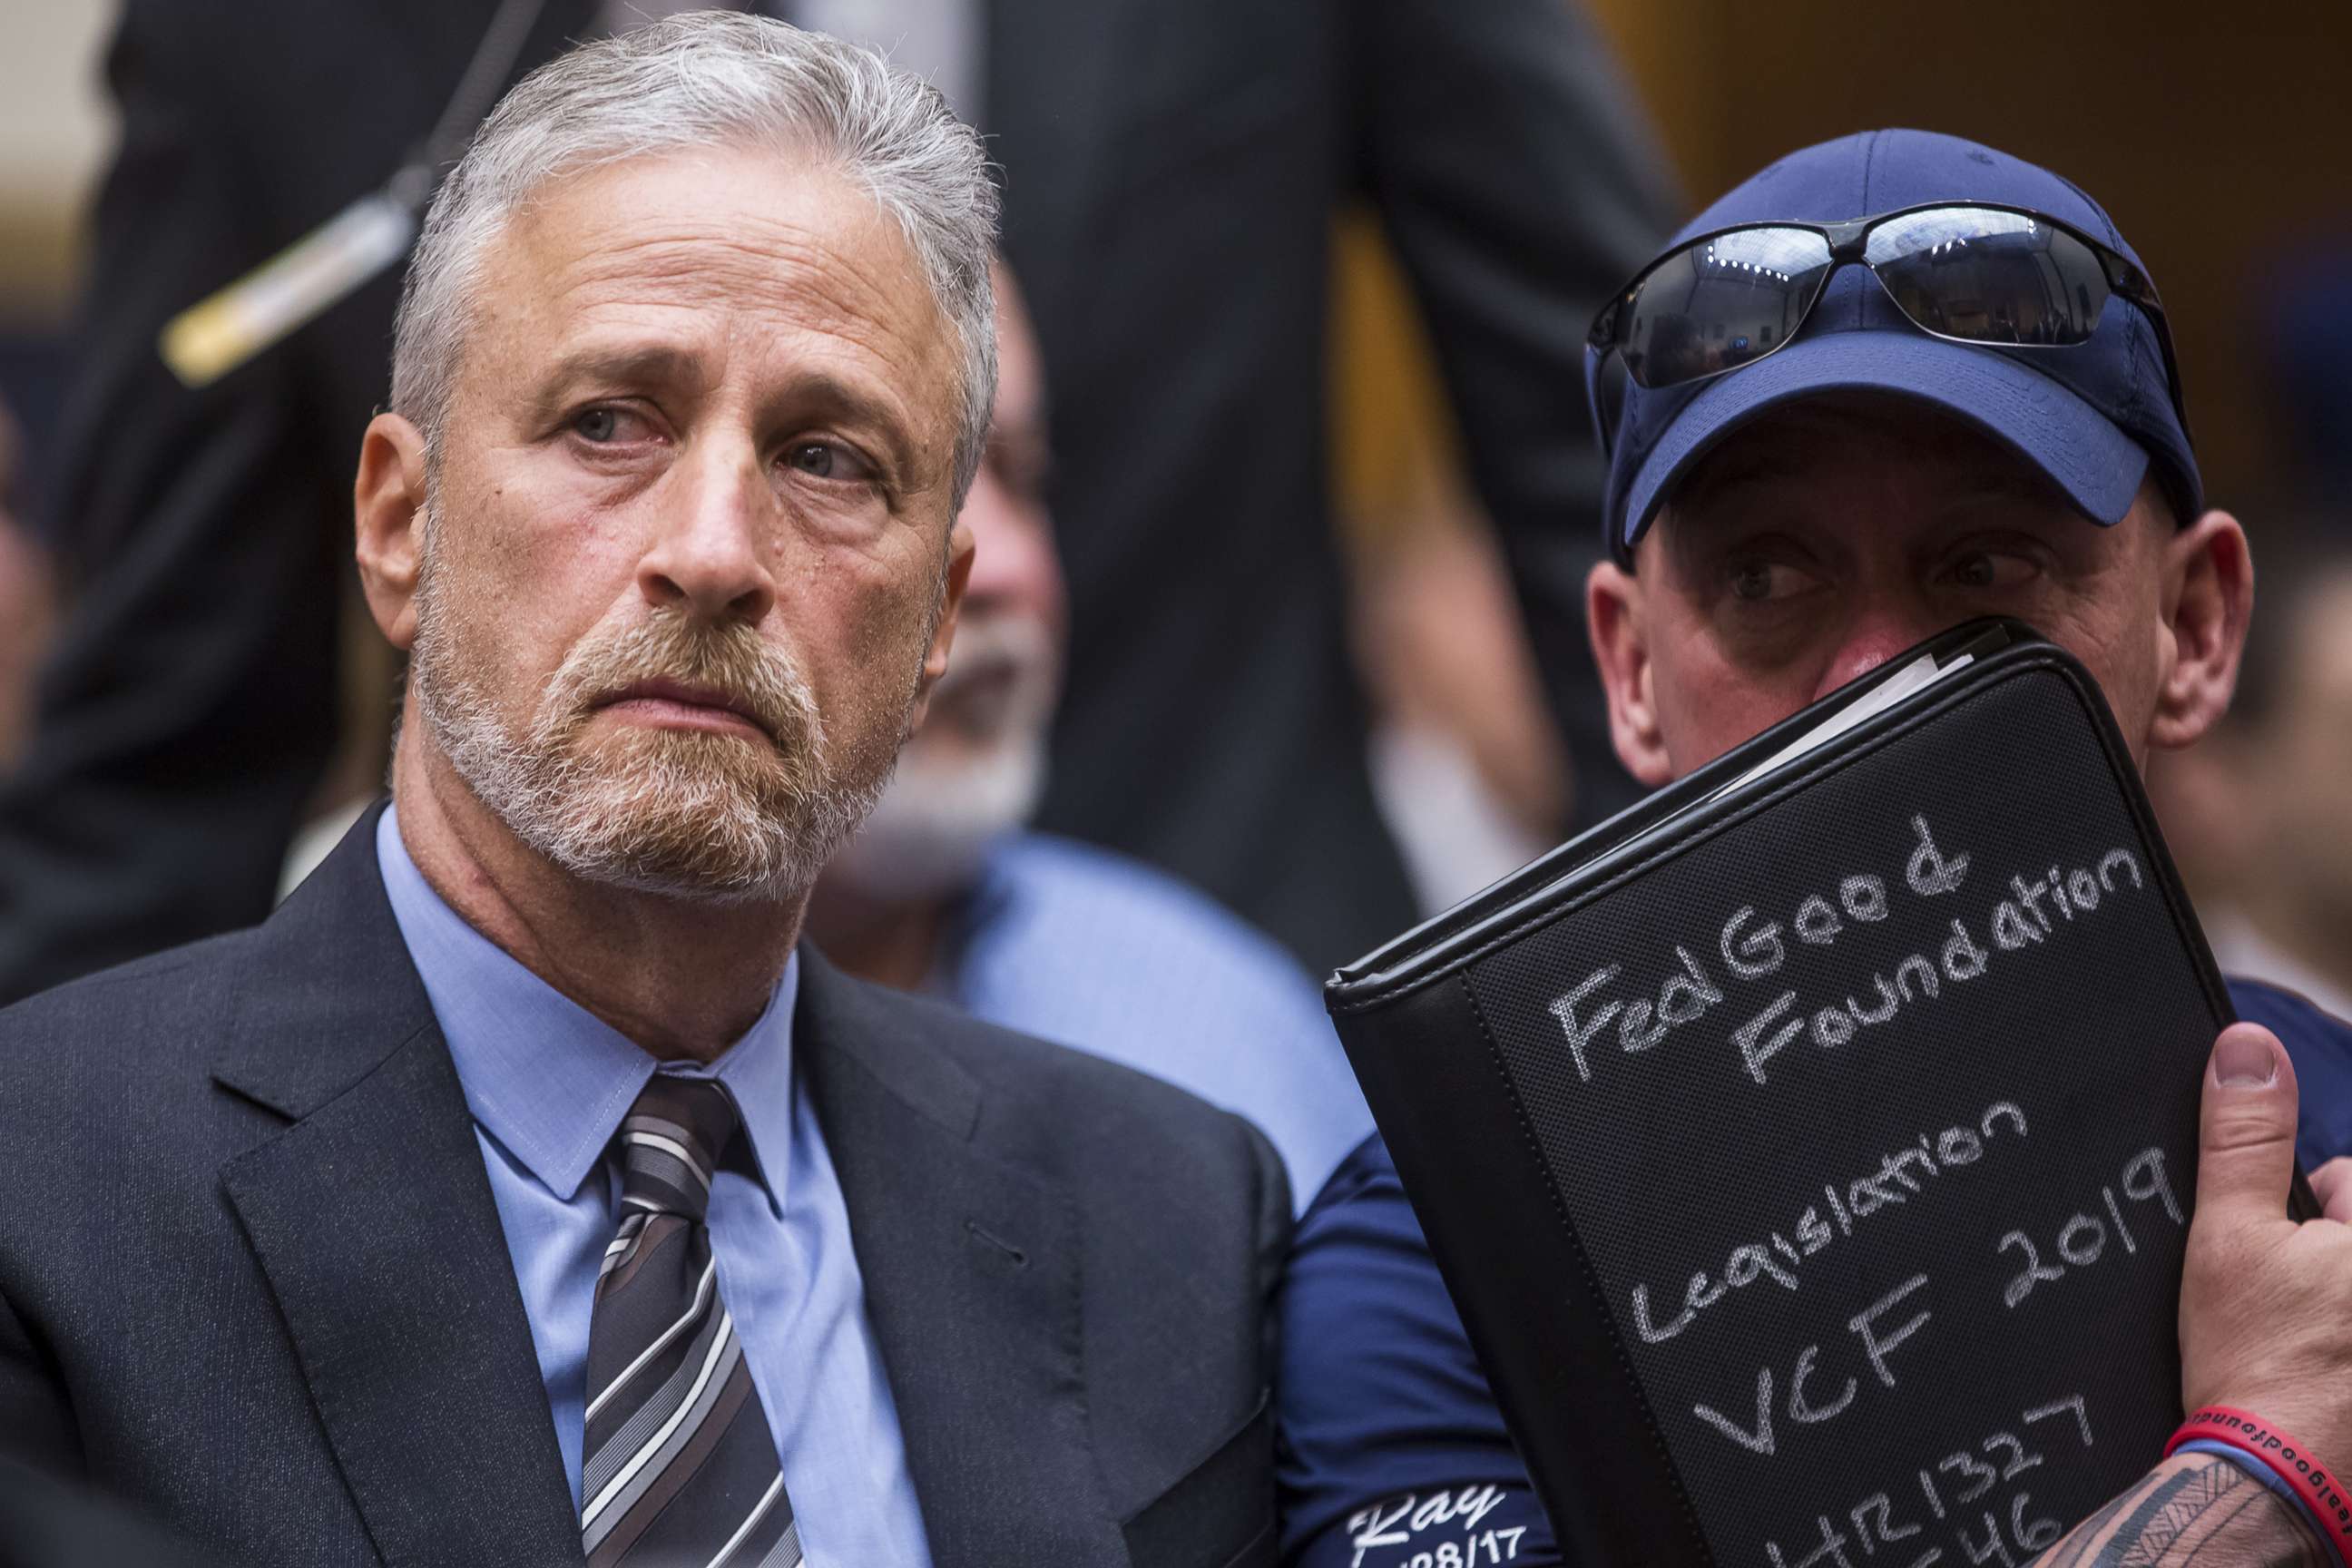 PHOTO:Former Daily Show Host Jon Stewart and FealGood Foundation co-founder John Fealis before testifying during a House Judiciary Committee hearing on Capitol Hill, June 11, 2019 in Washington, D.C.